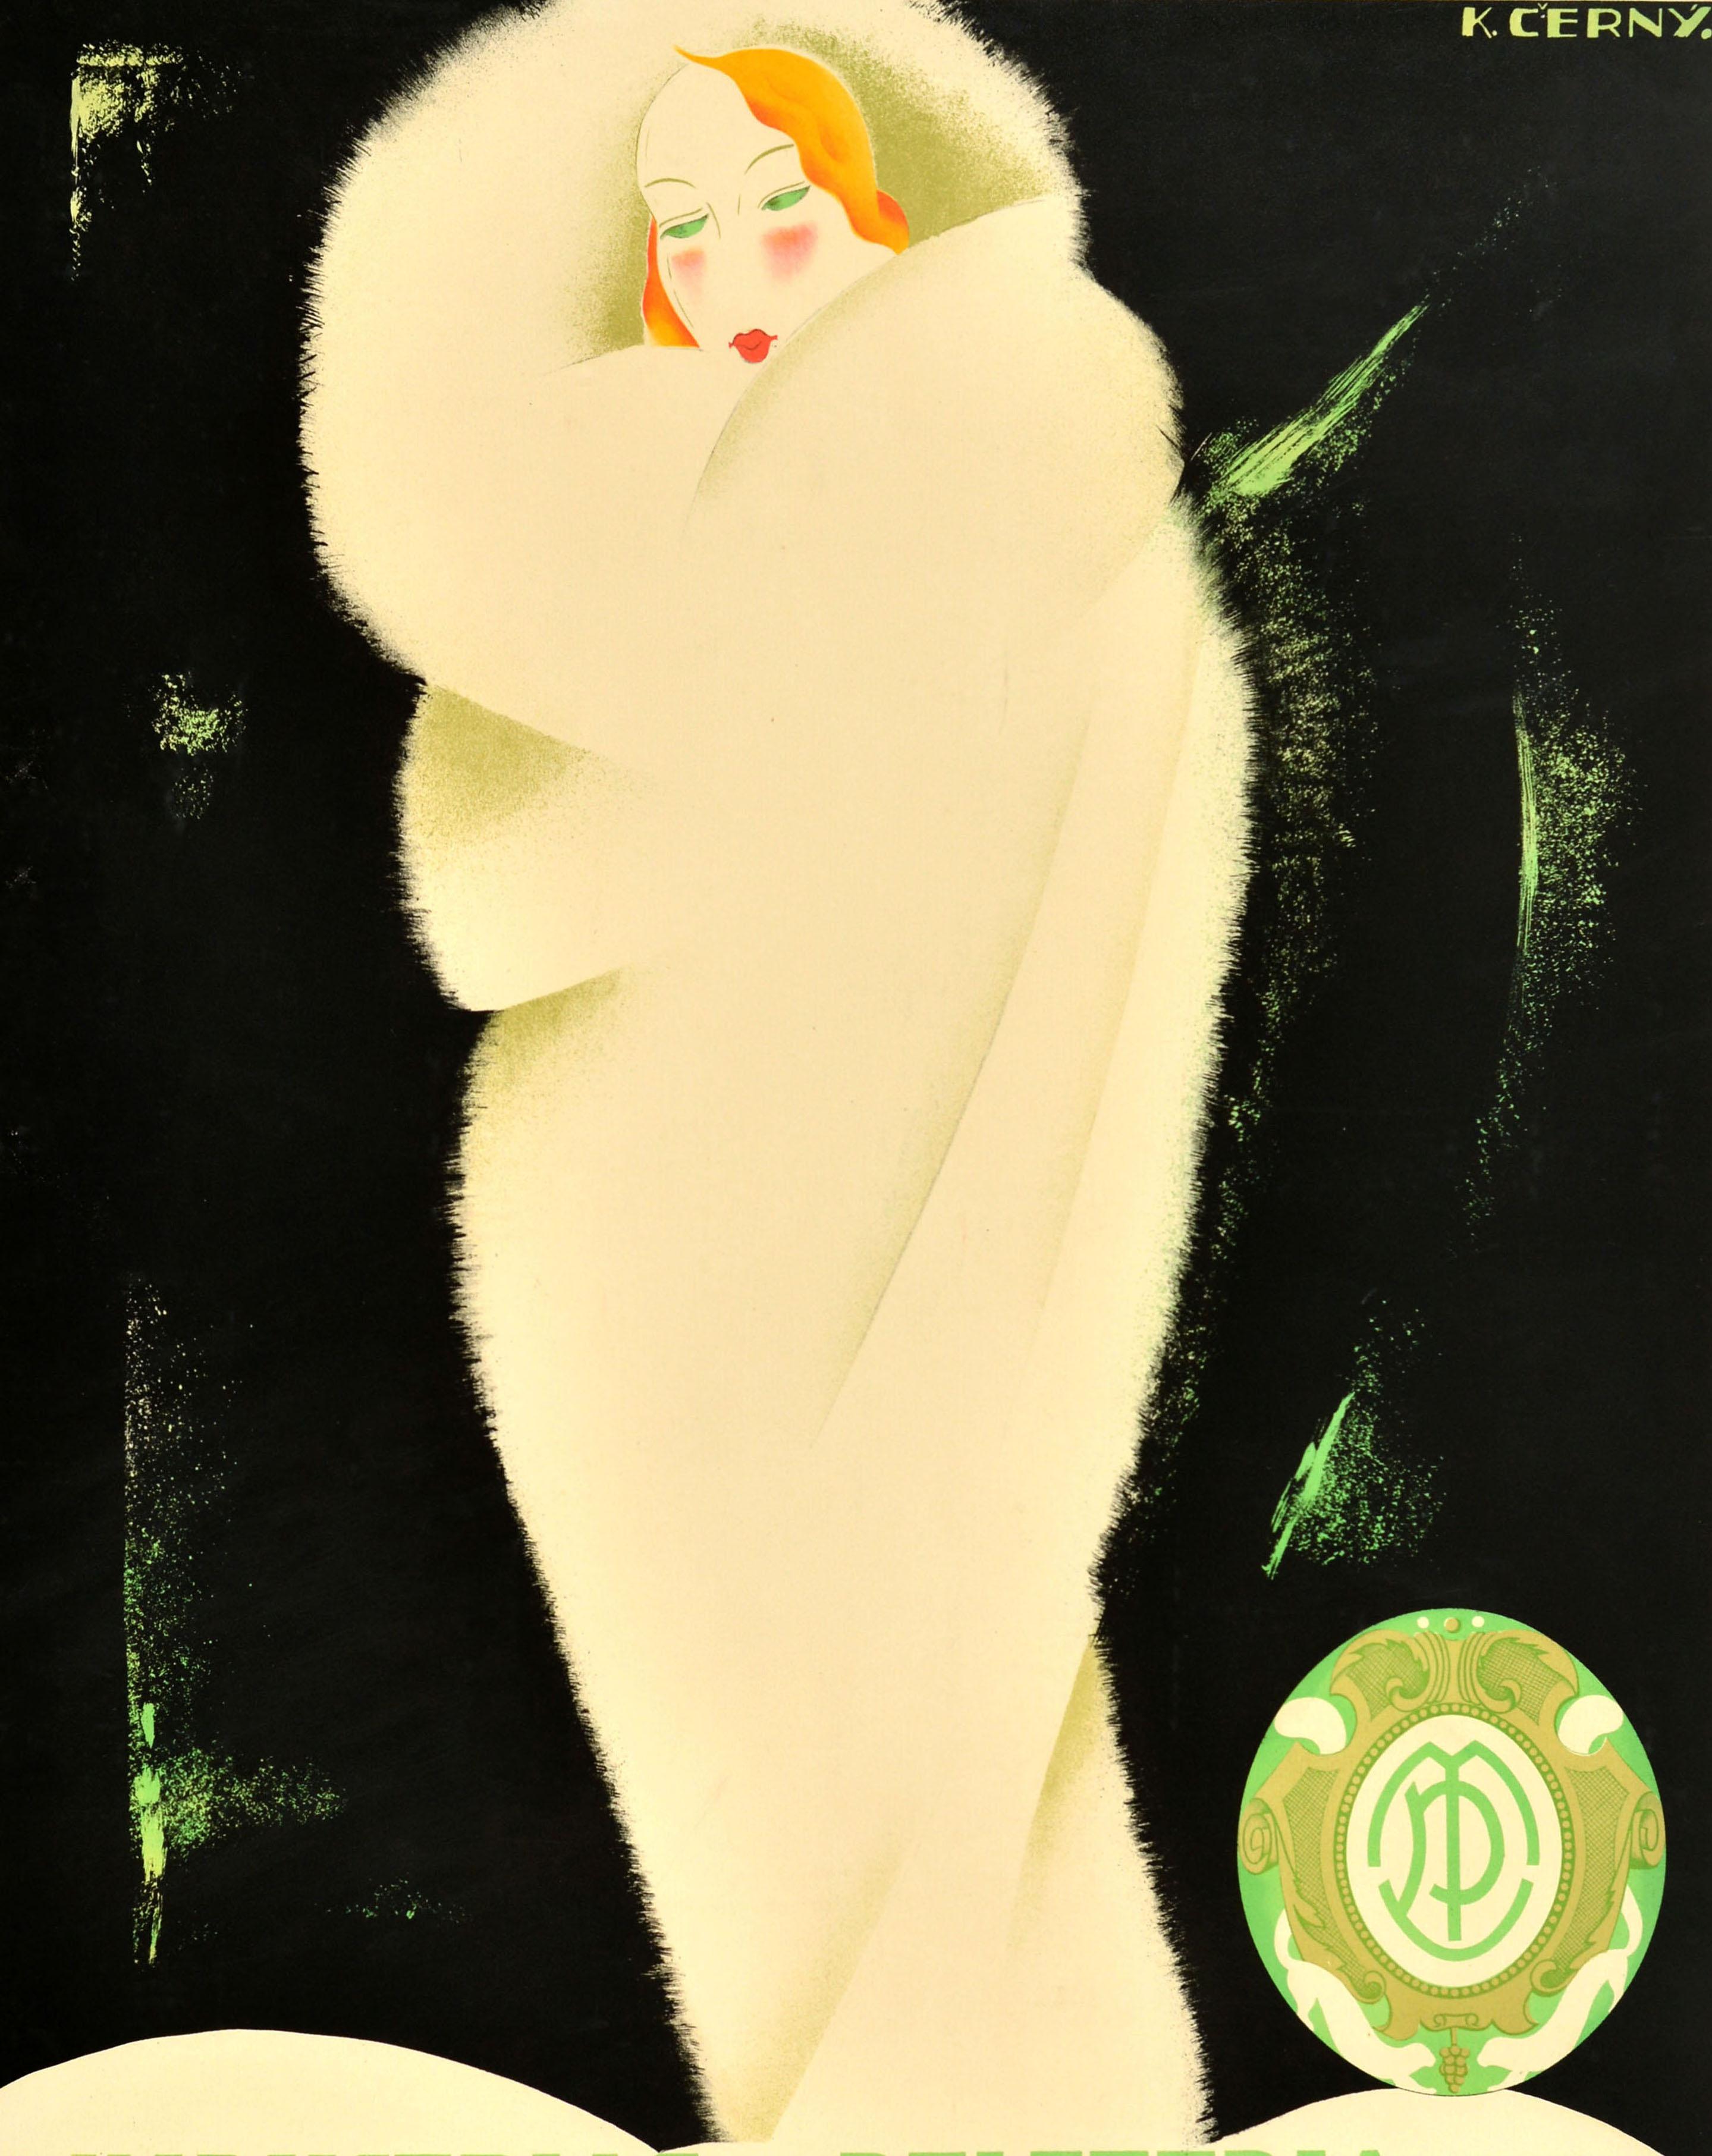 Original vintage Spanish clothing advertising poster - Industrias de Peleteria Tapbioles y Pirretas Fur Industry Barcelona - featuring an elegant Art Deco design by the Czech artist Karel Cerny (1910-1960) depicting a fashionably dressed lady in